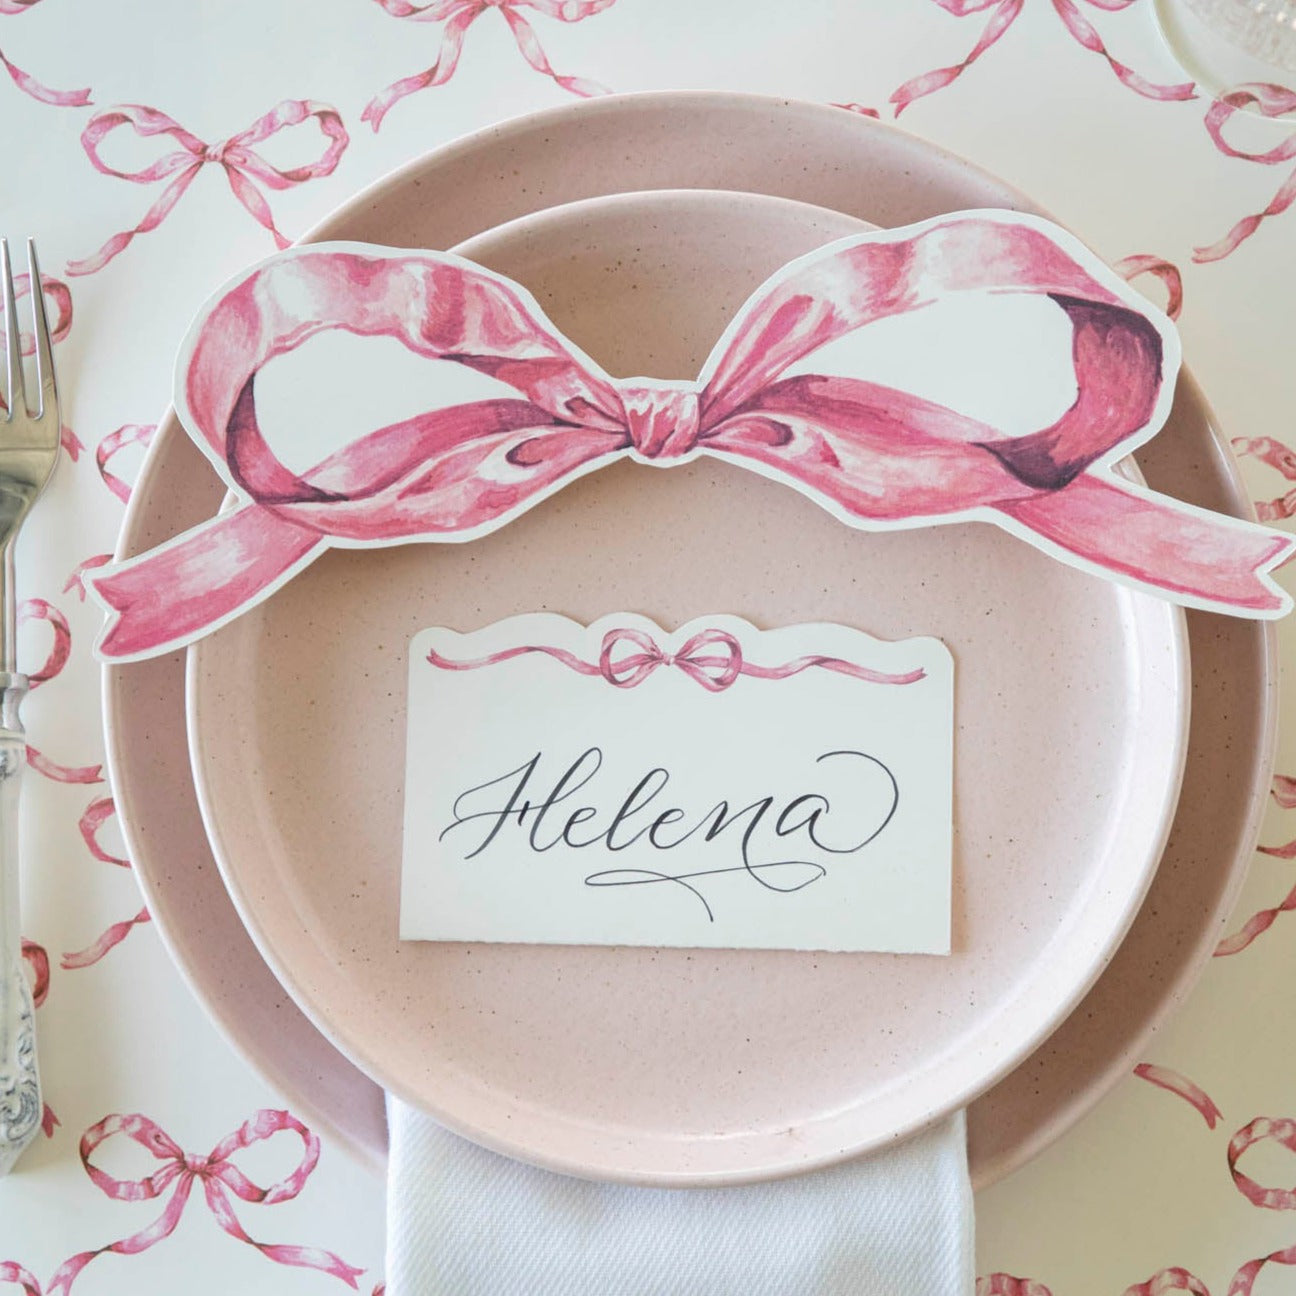 An elegant place setting featuring a Pink Bow Table Accent resting on the plate with a name card.